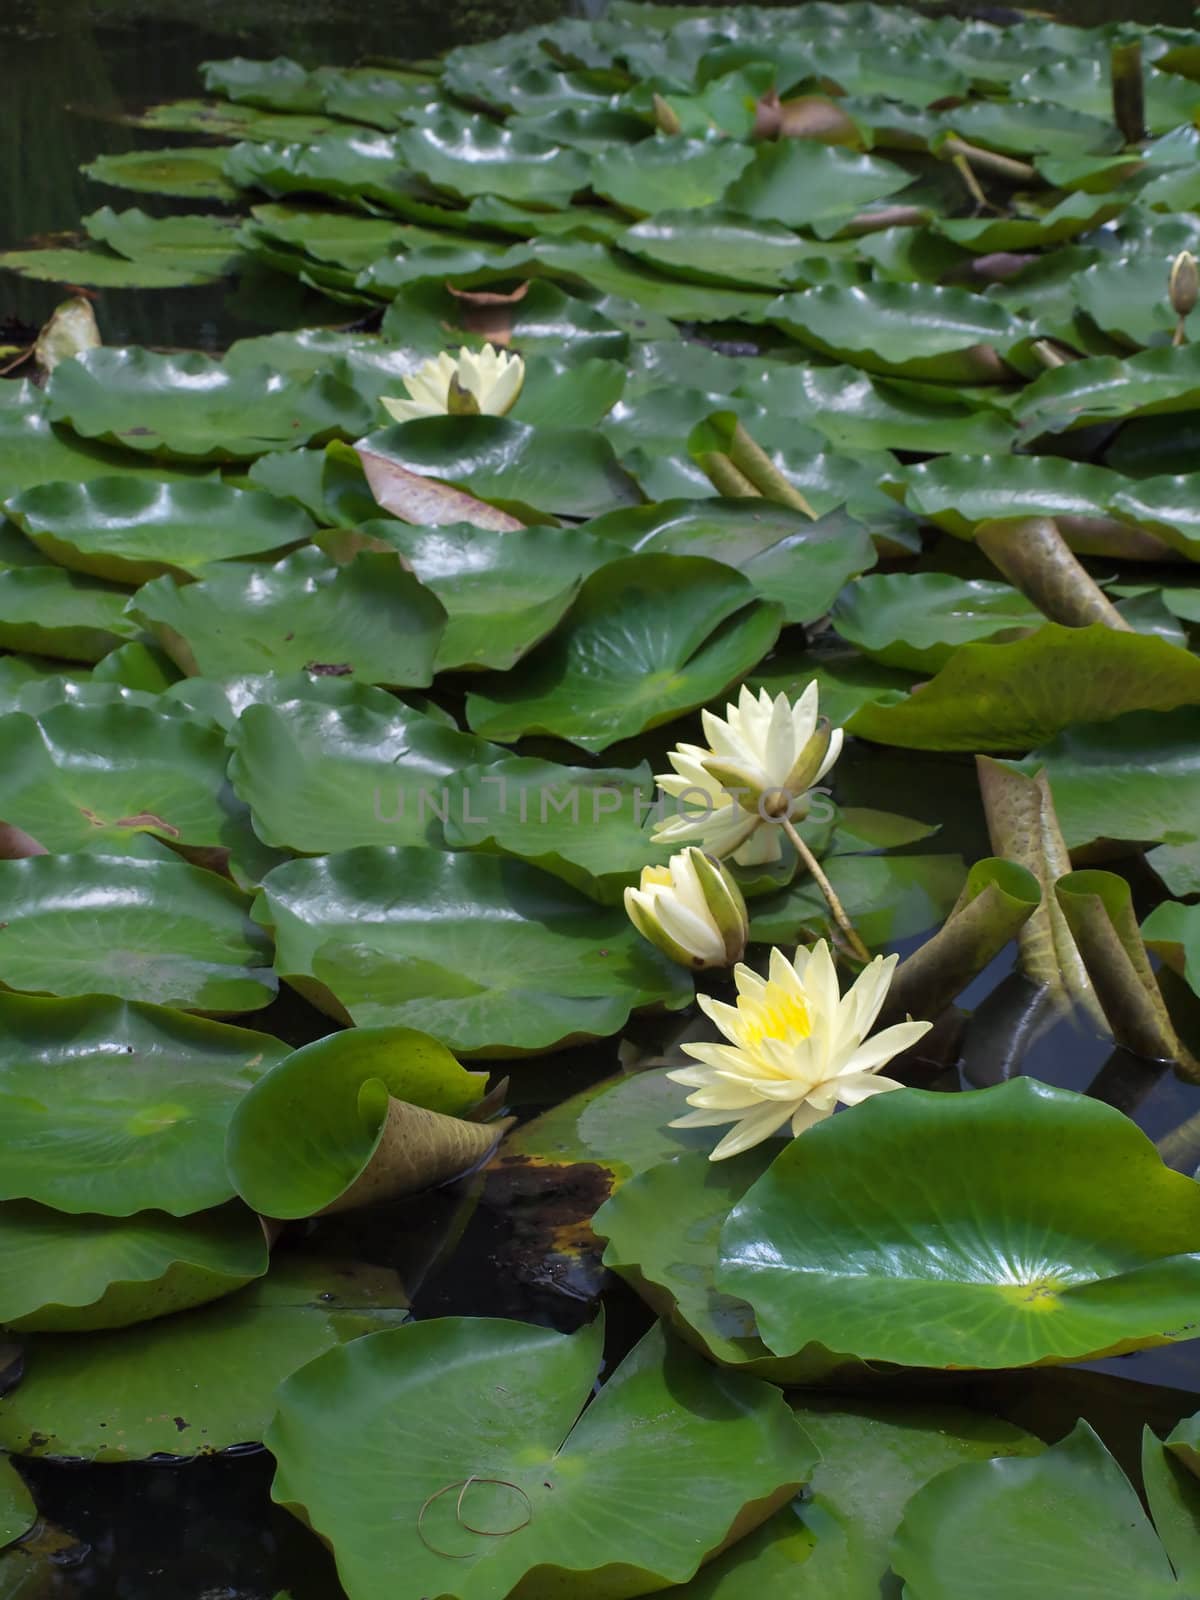 Lotus flower blossom with a lot of foliage